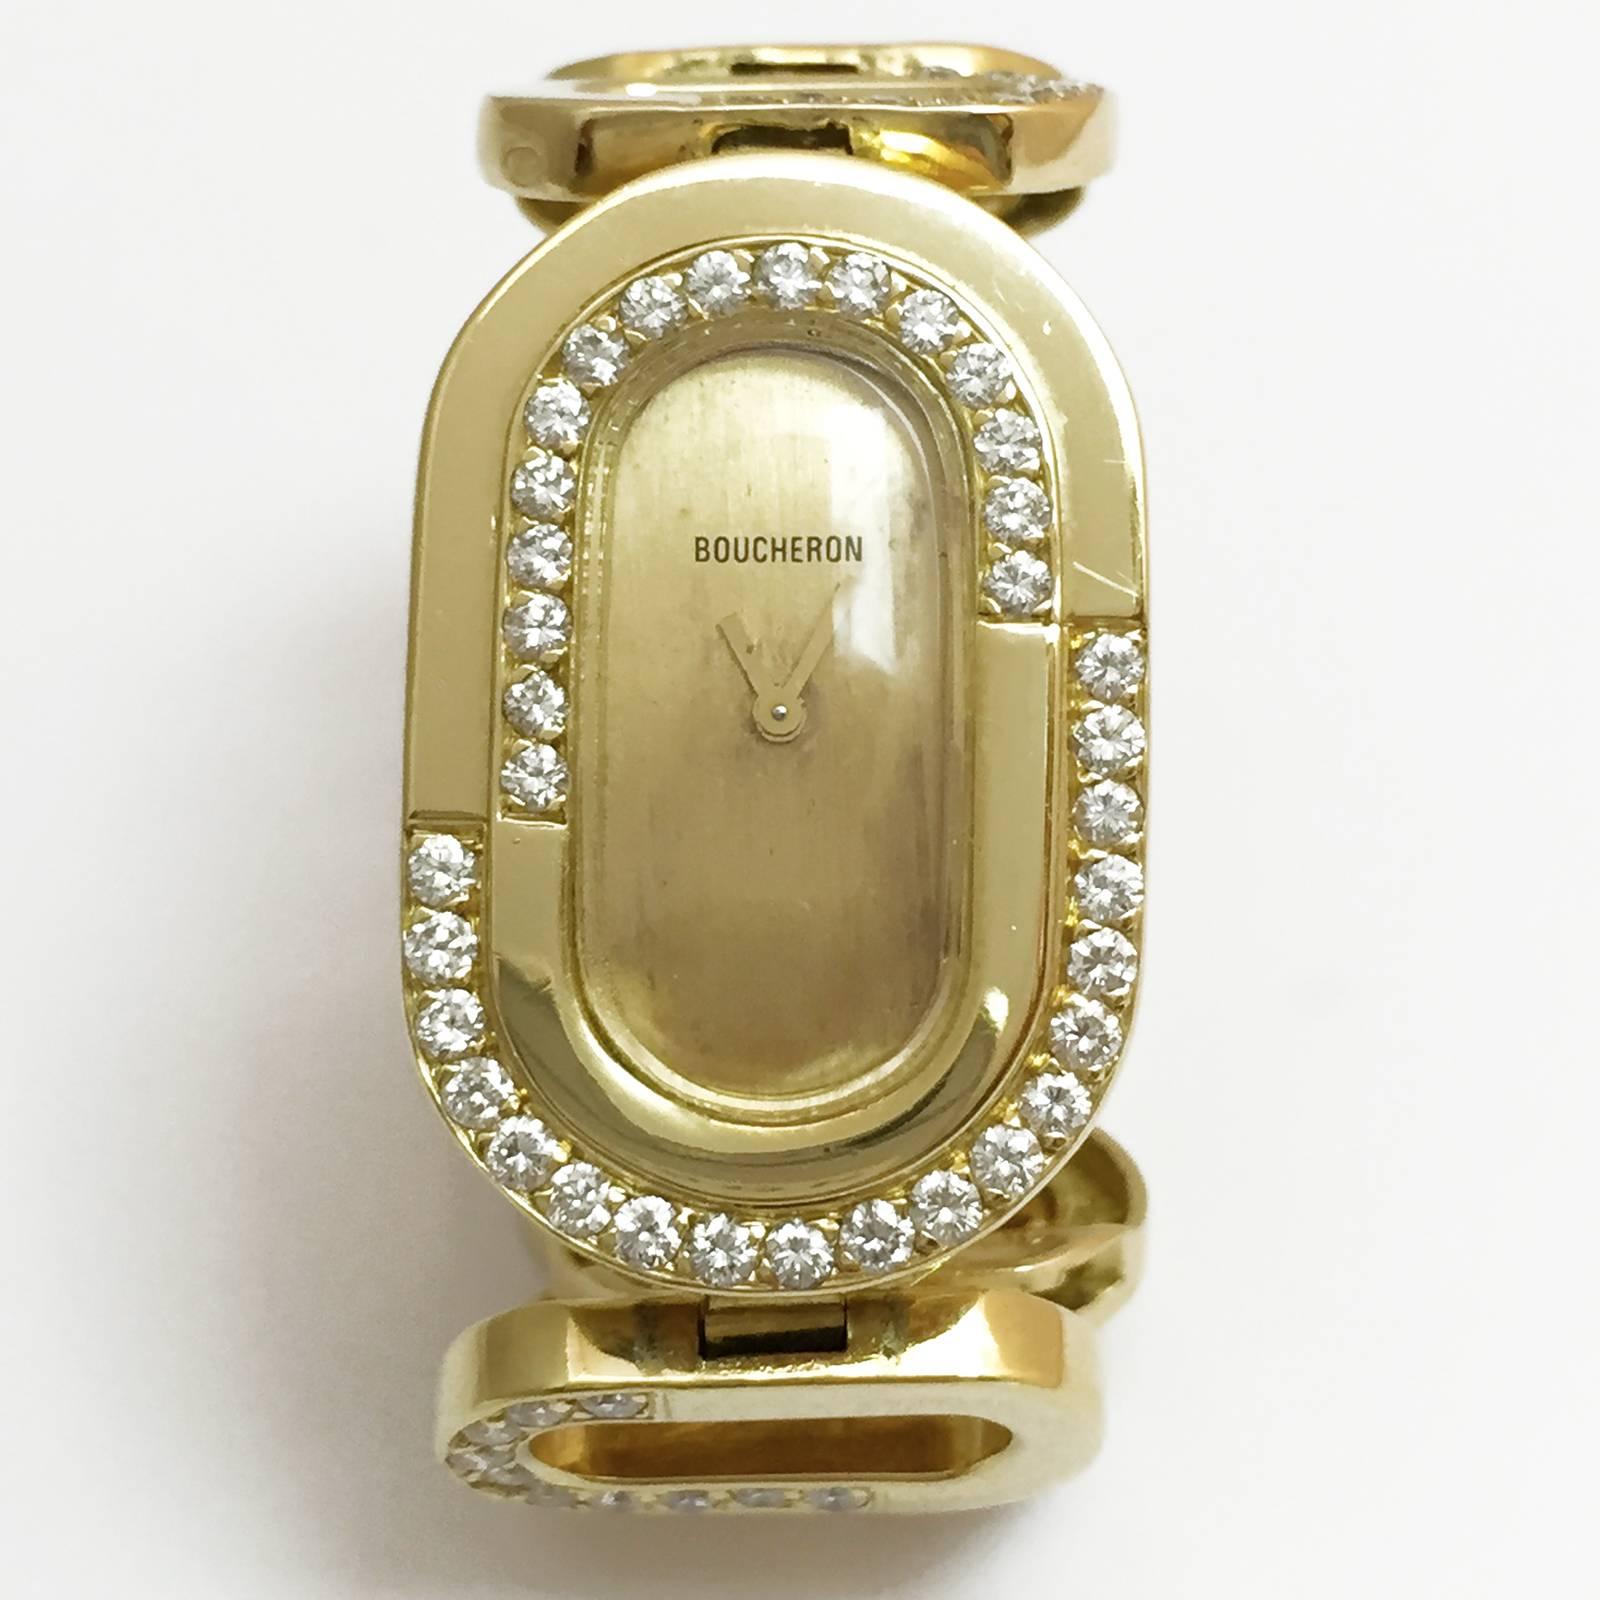 A Boucheron lady's 18kt yellow gold bracelet watch, circa 1970s, set with approximately 3 carats of brilliant cut diamonds. 
Manual-winding movement. 
Overall length of bracelet : 160 mm
Graved back face : 11-6-1975